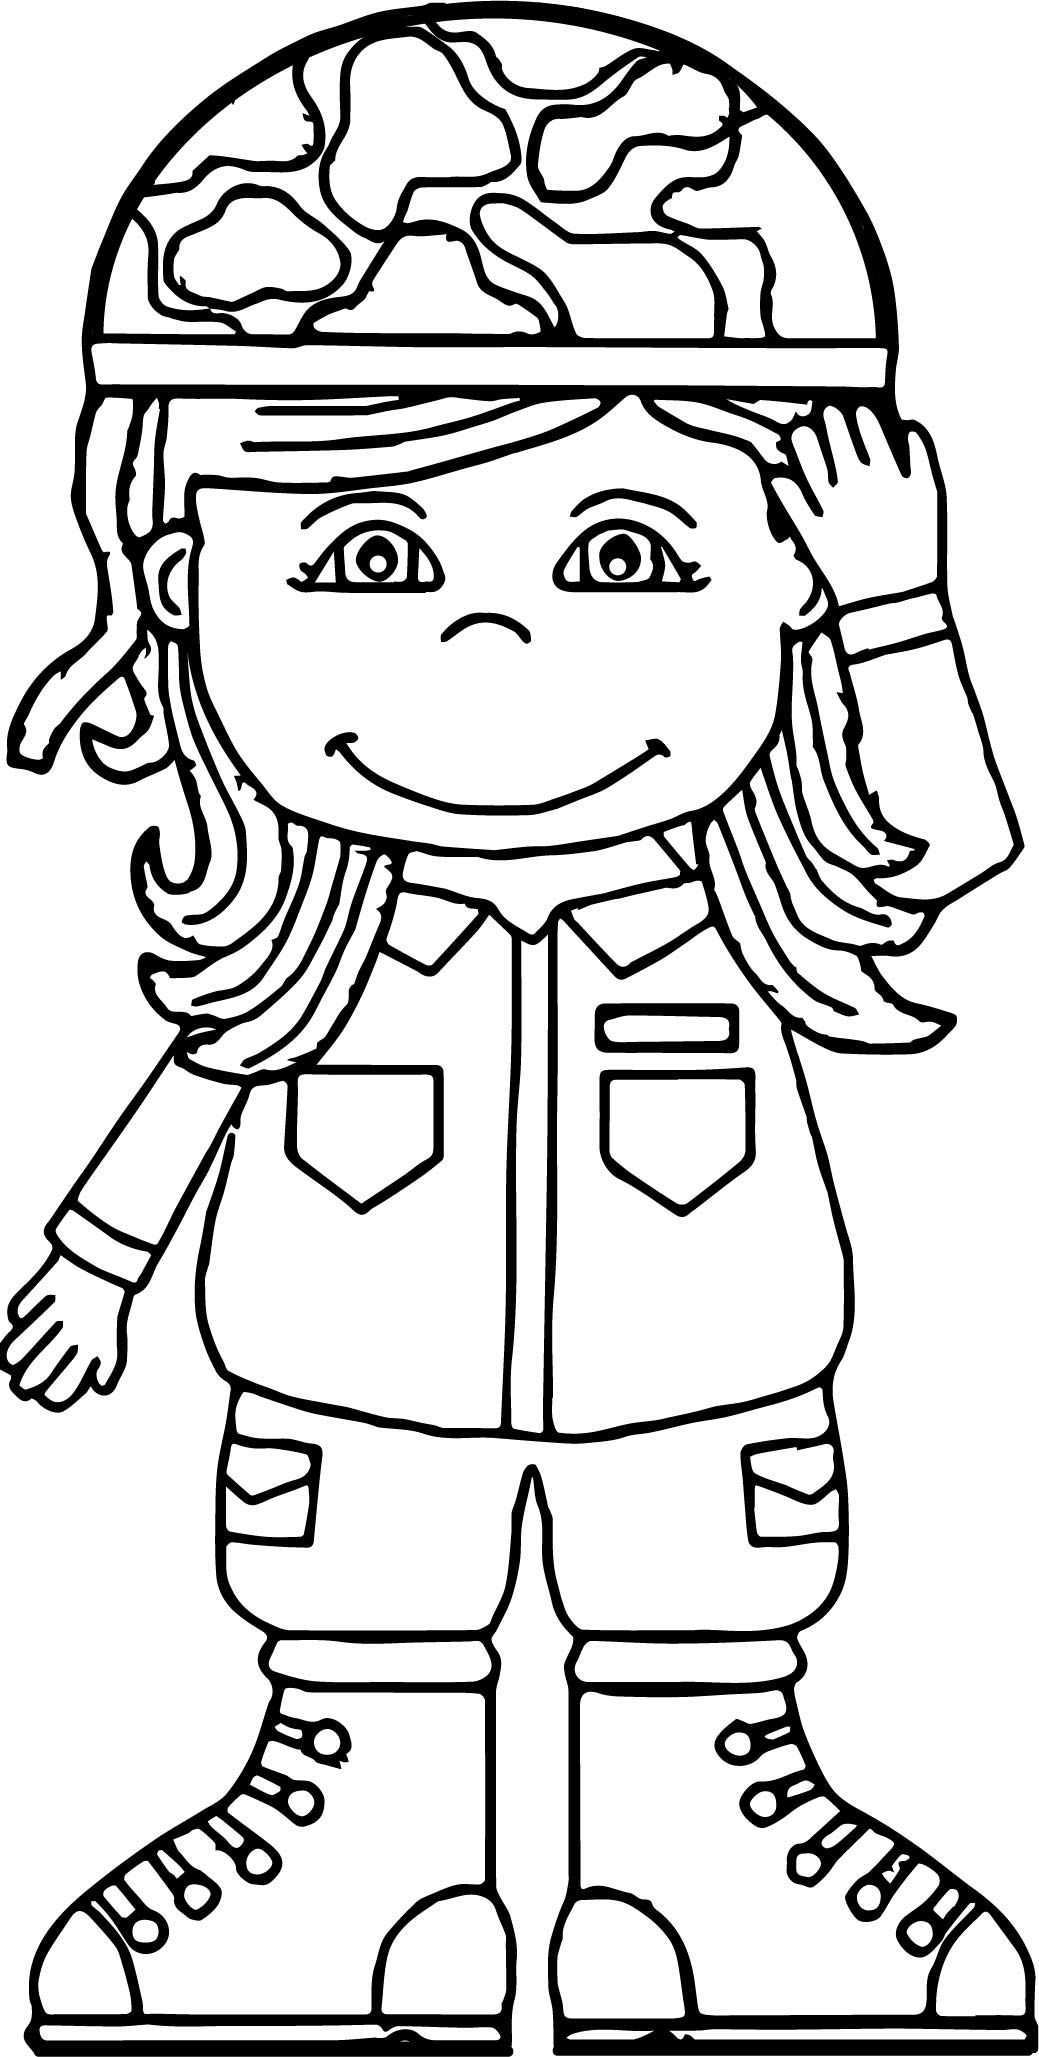 Cool Soldier Girl Coloring Page Coloring Pages For Girls Coloring Pages For Kids Vete